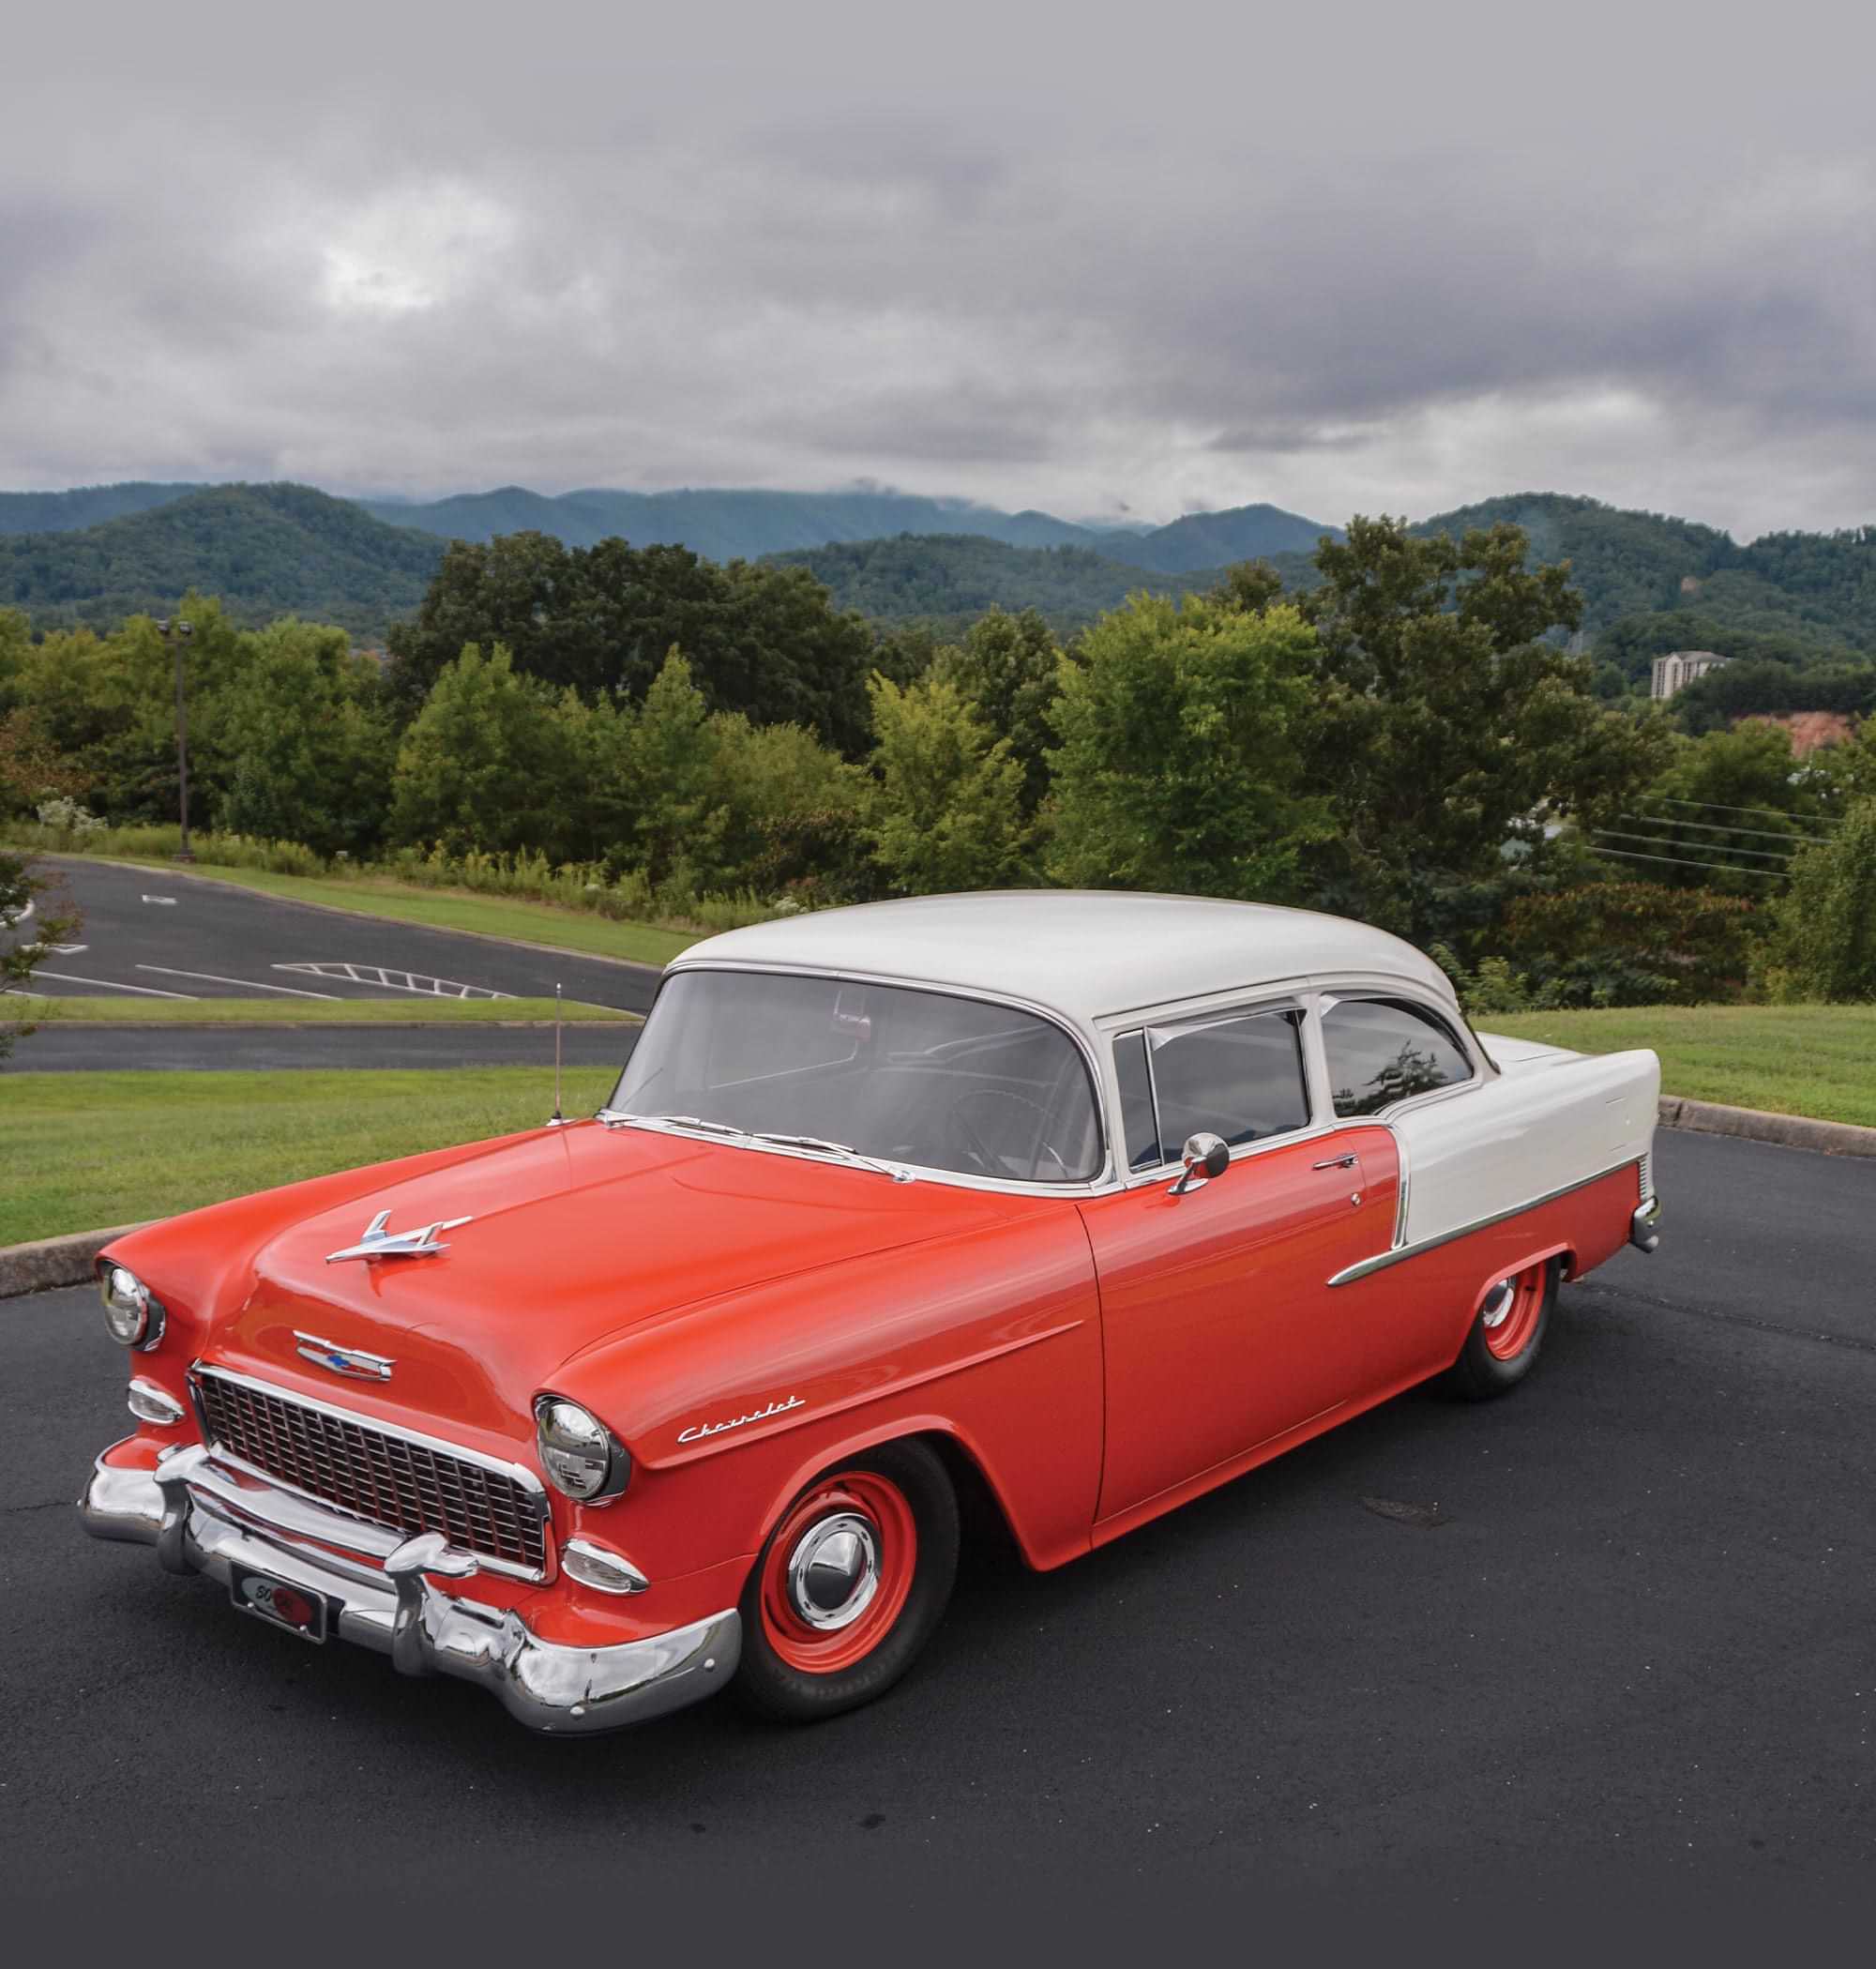 high angle three quarter view of the ’55 Chevy Delray parked against a background of green trees and hills